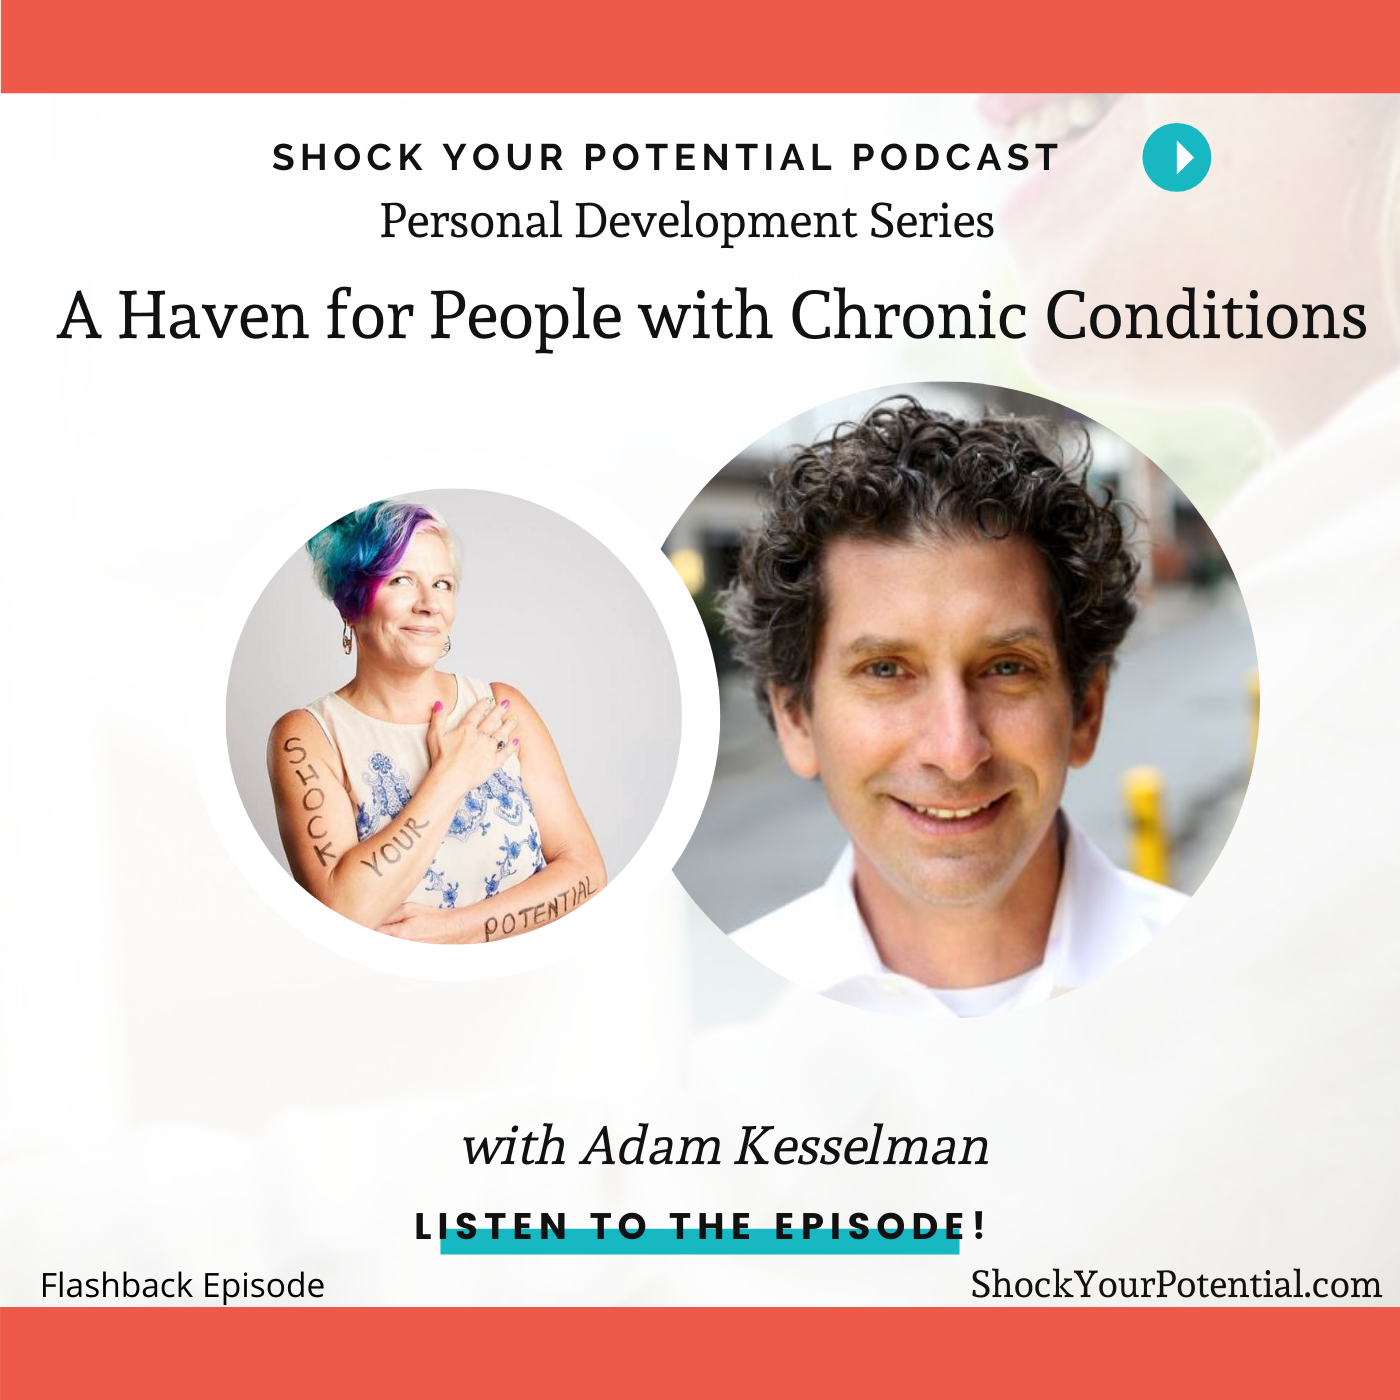 A Haven for People with Chronic Conditions – Adam Kesslman